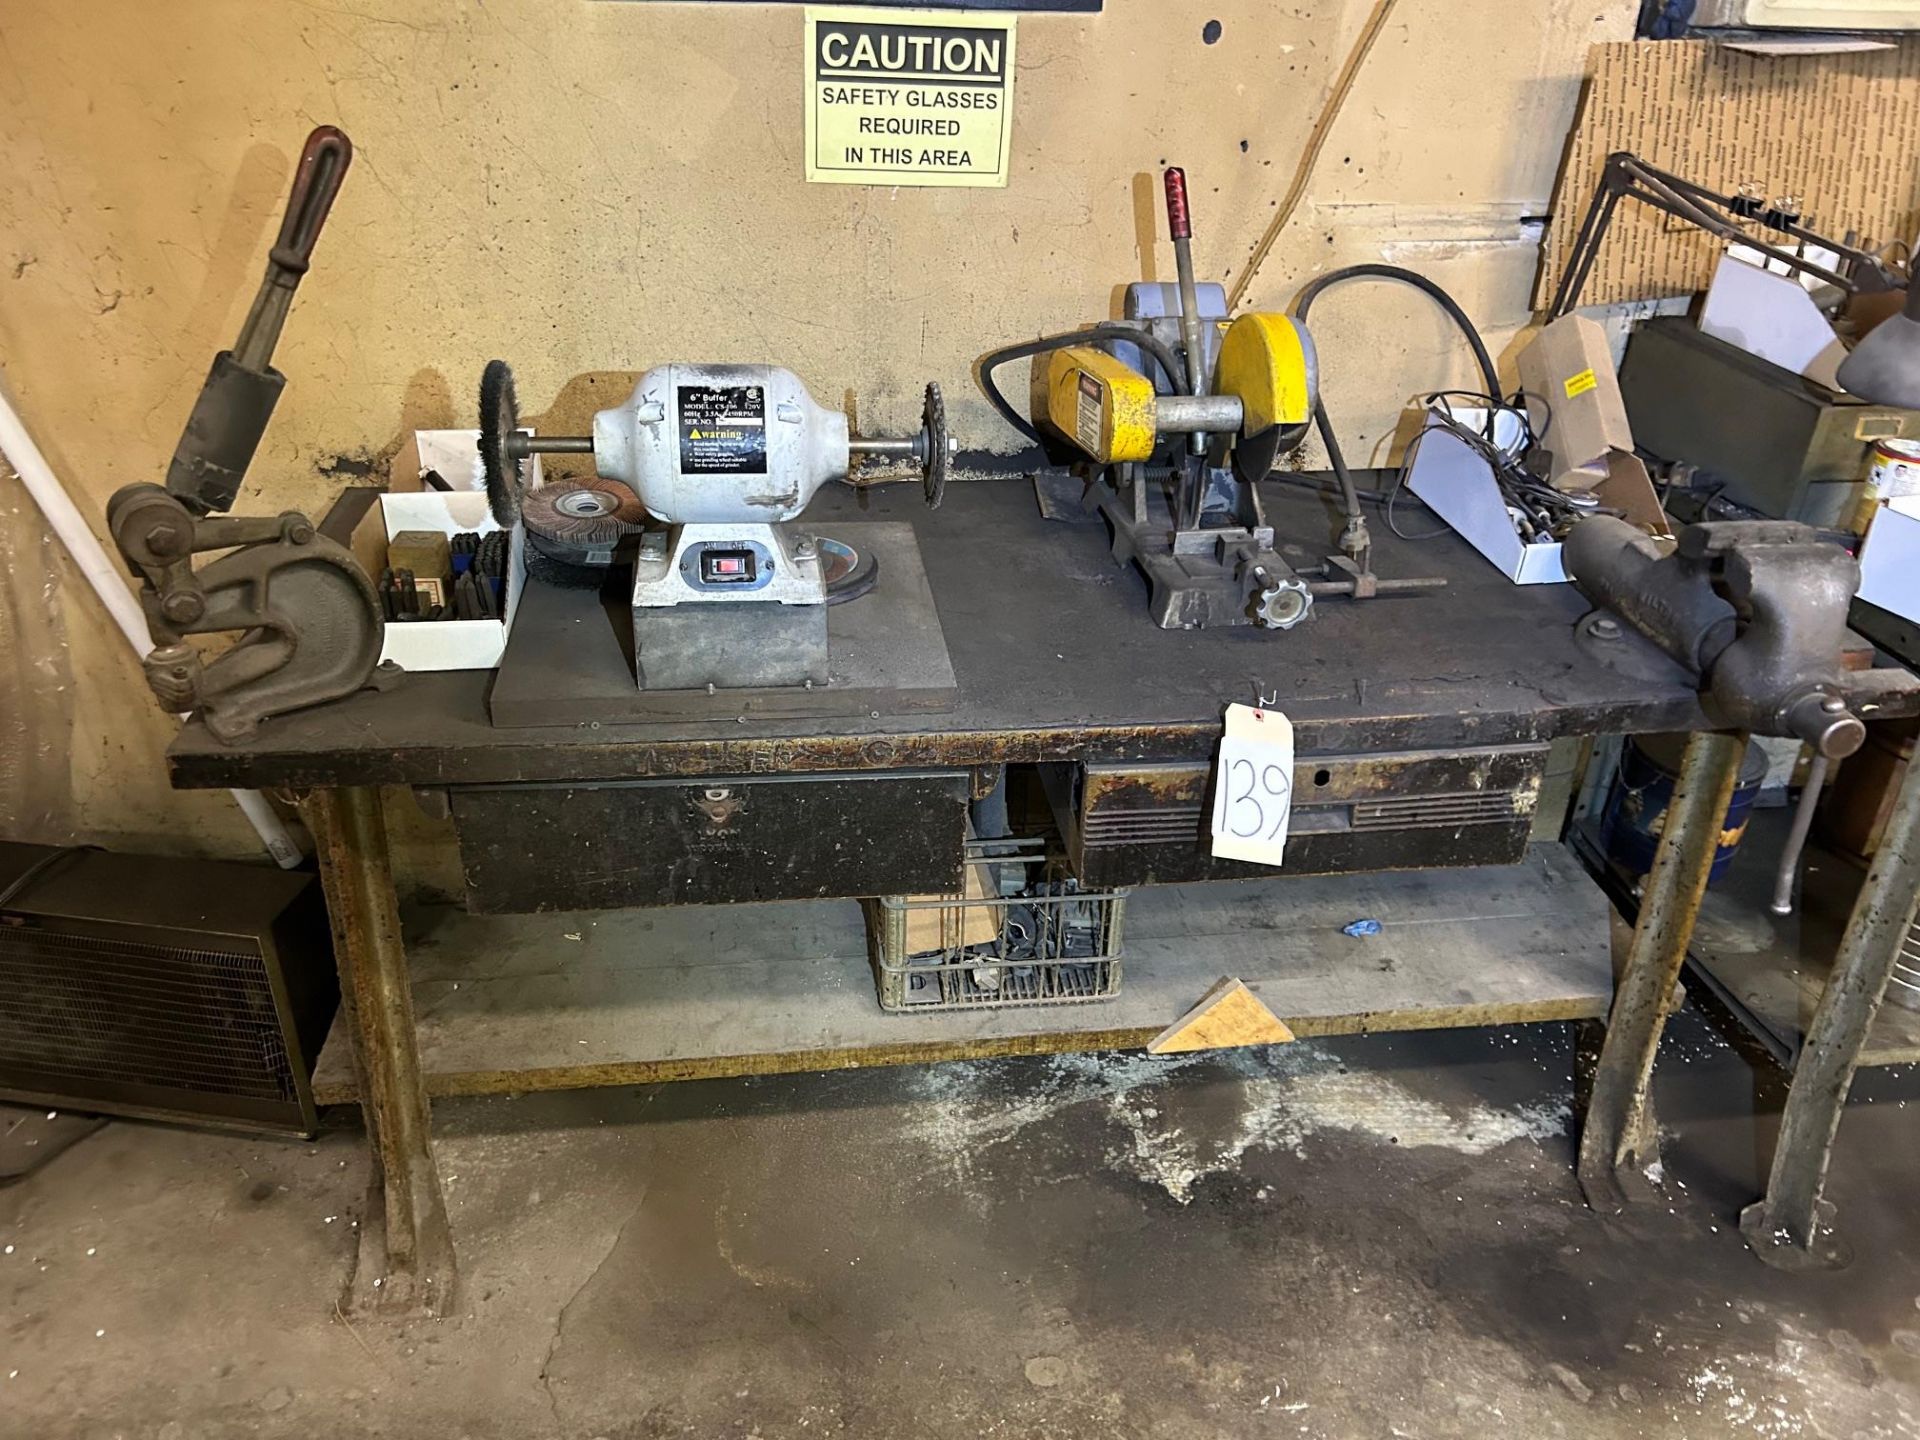 Work Bench Table and Contents, Dual Grinder, Vise, Metal Cutting Saw